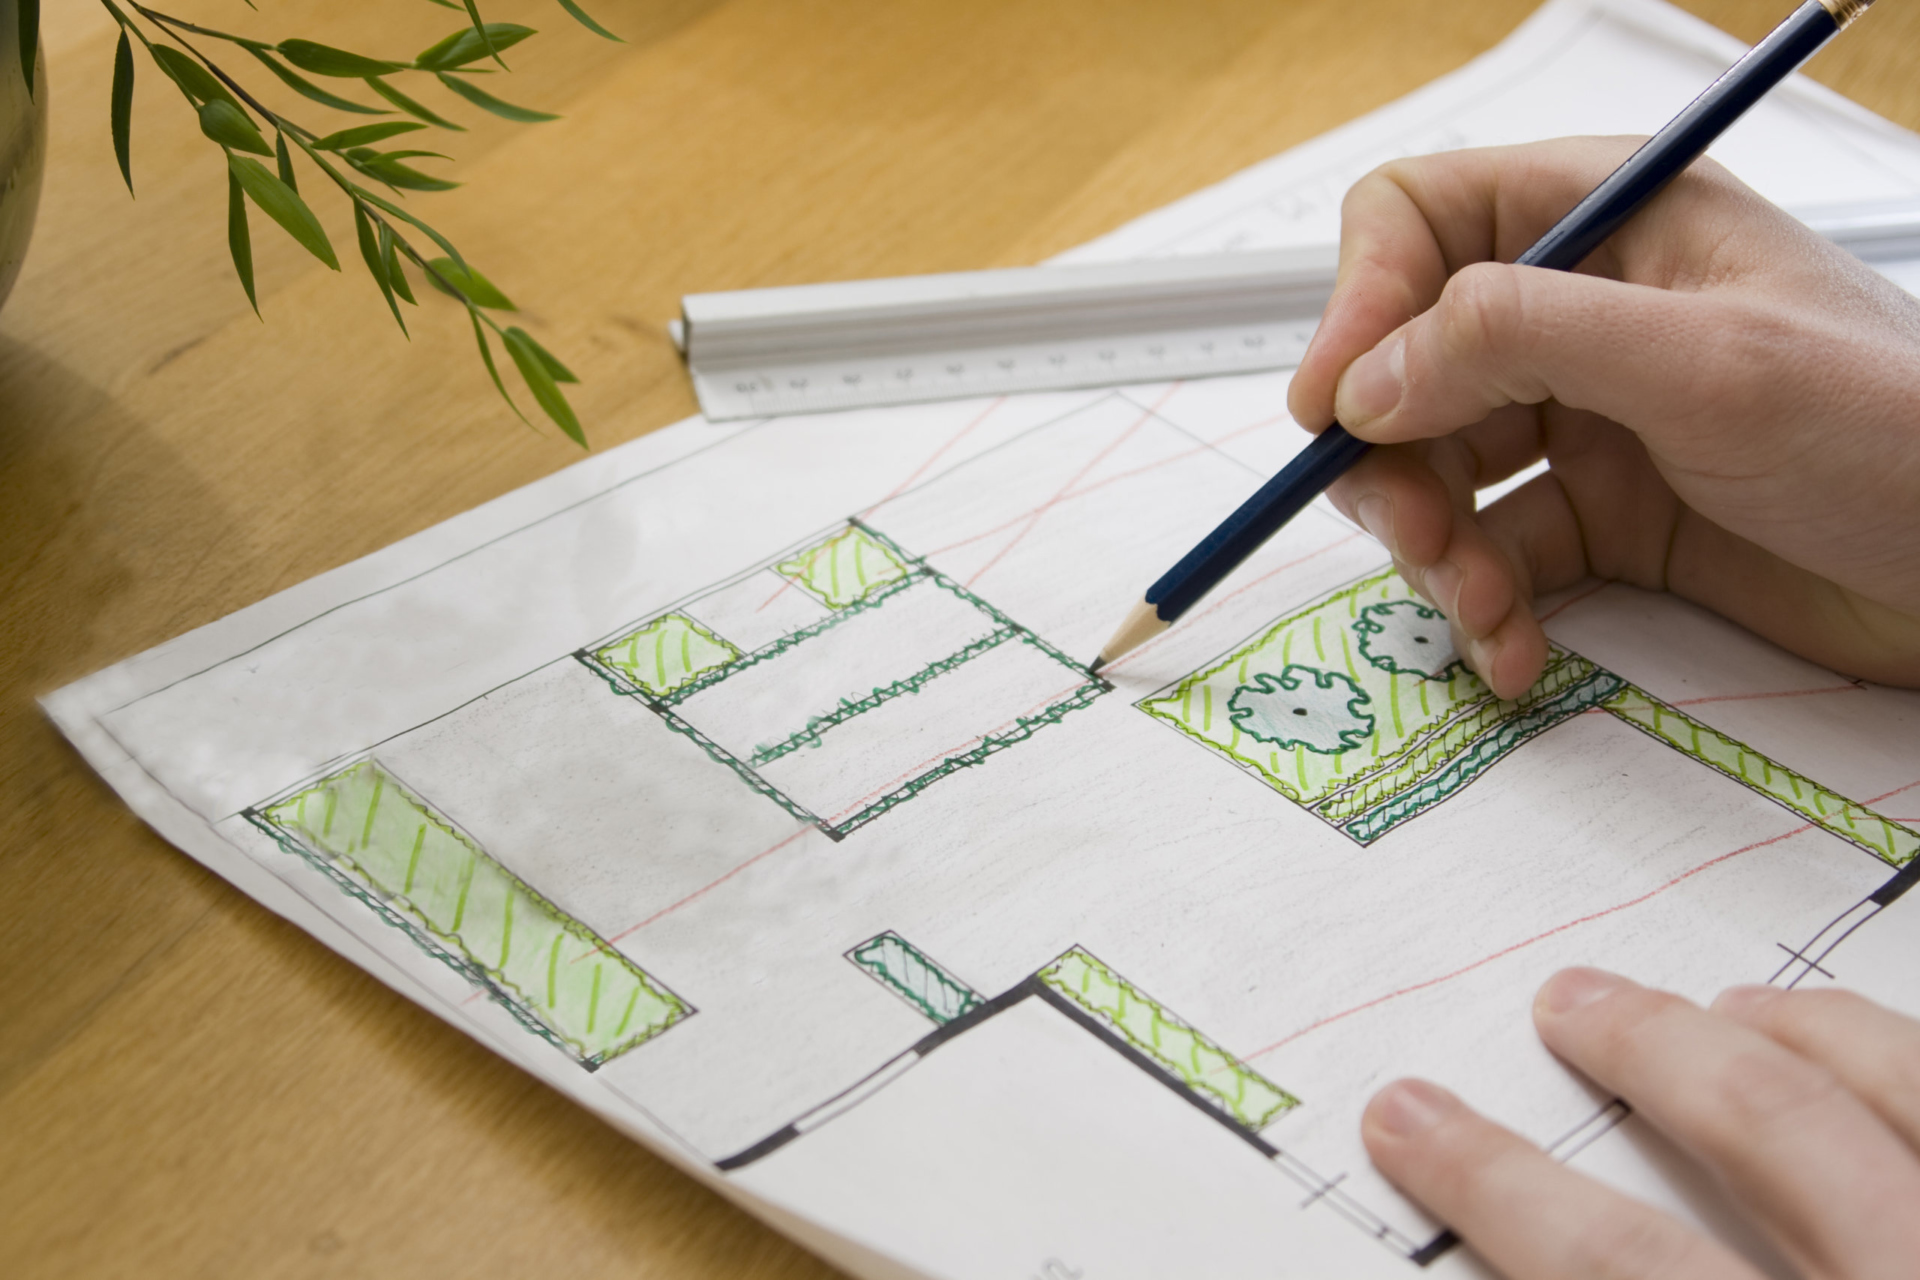 Planning a garden out on paper.